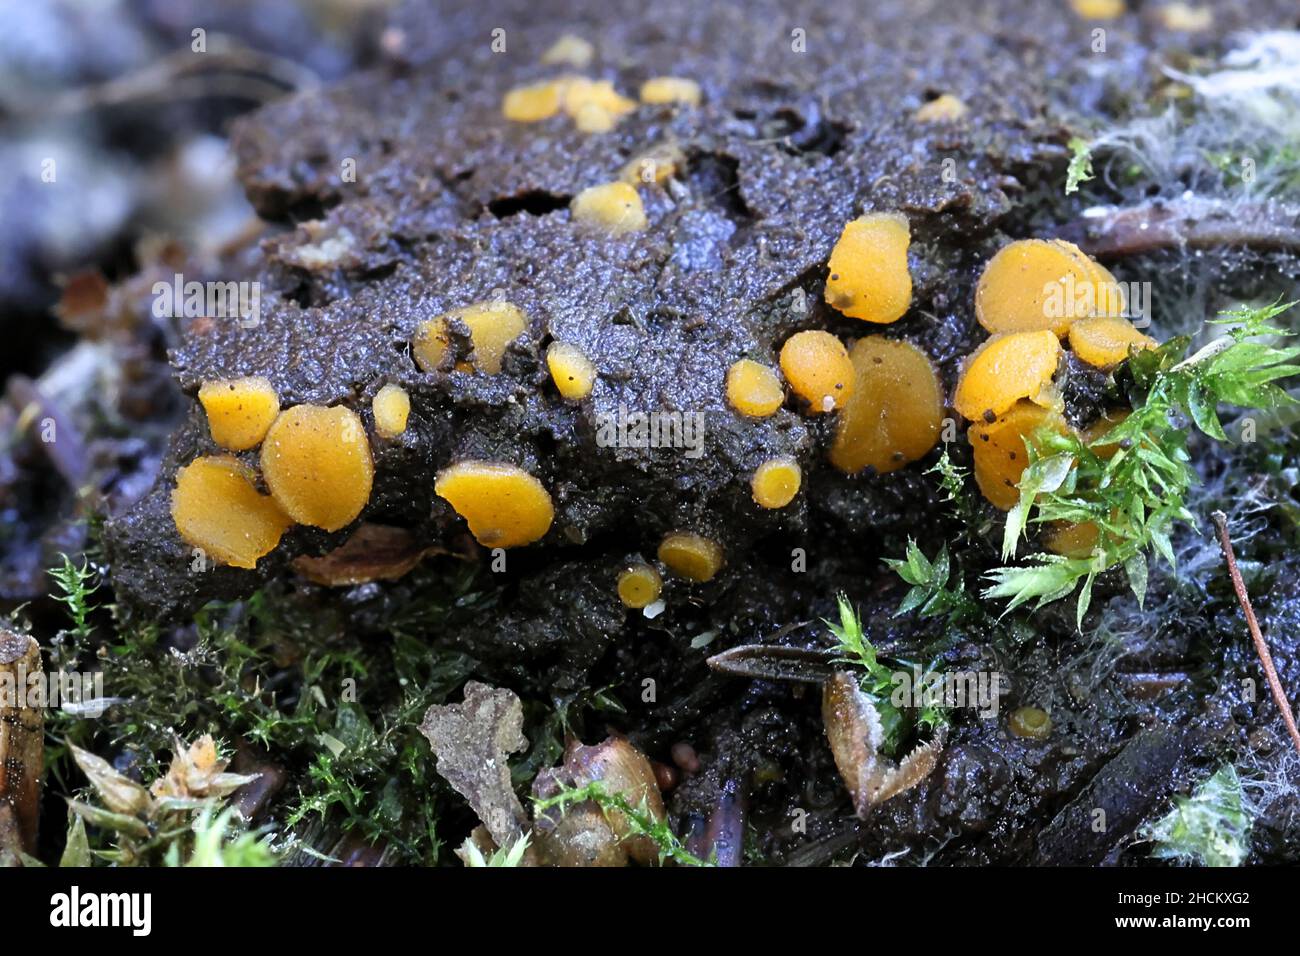 Ramsbottomia crechqueraultii, tiny fungus growing on wet soil in Finlad Stock Photo